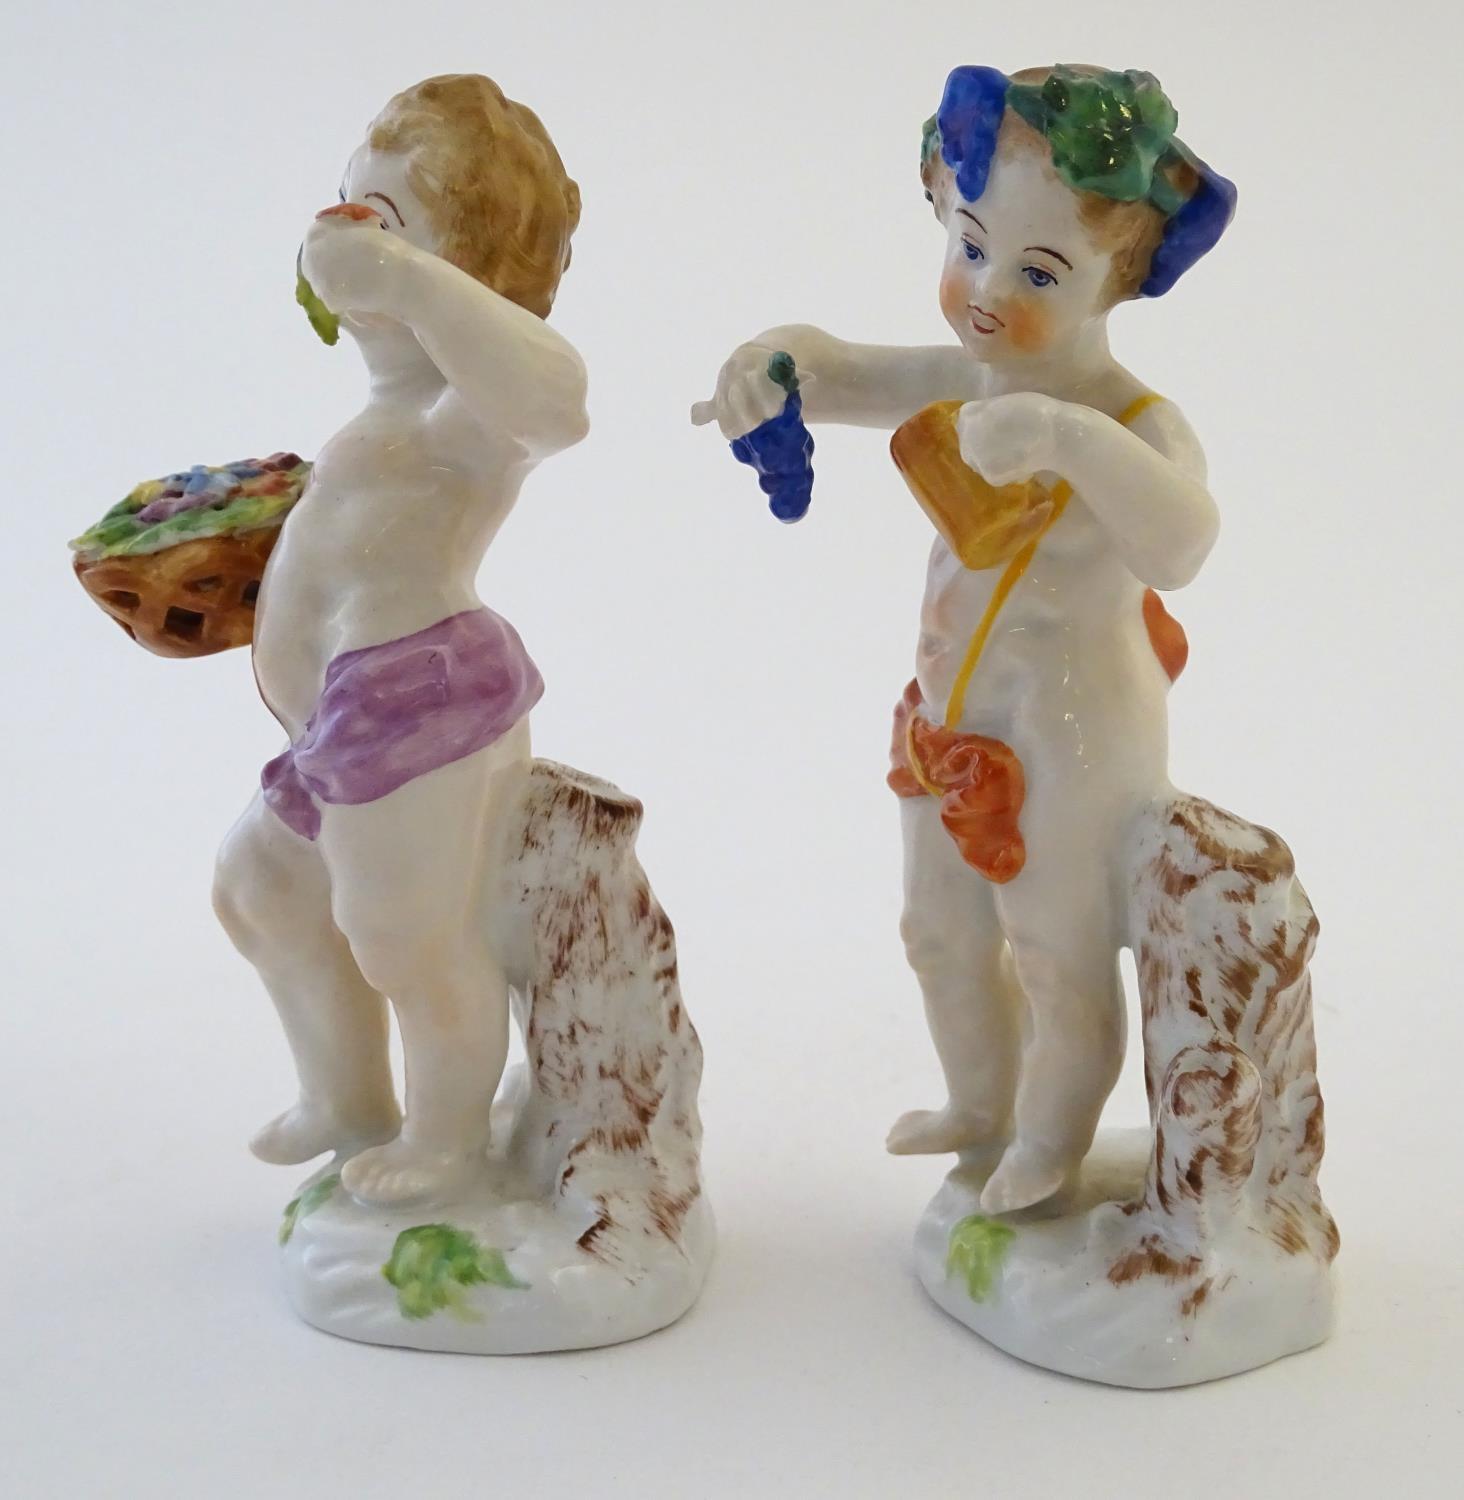 Two Italian putti / cherub figures depicting the seasons Spring and Summer, one with a basket of - Image 4 of 8